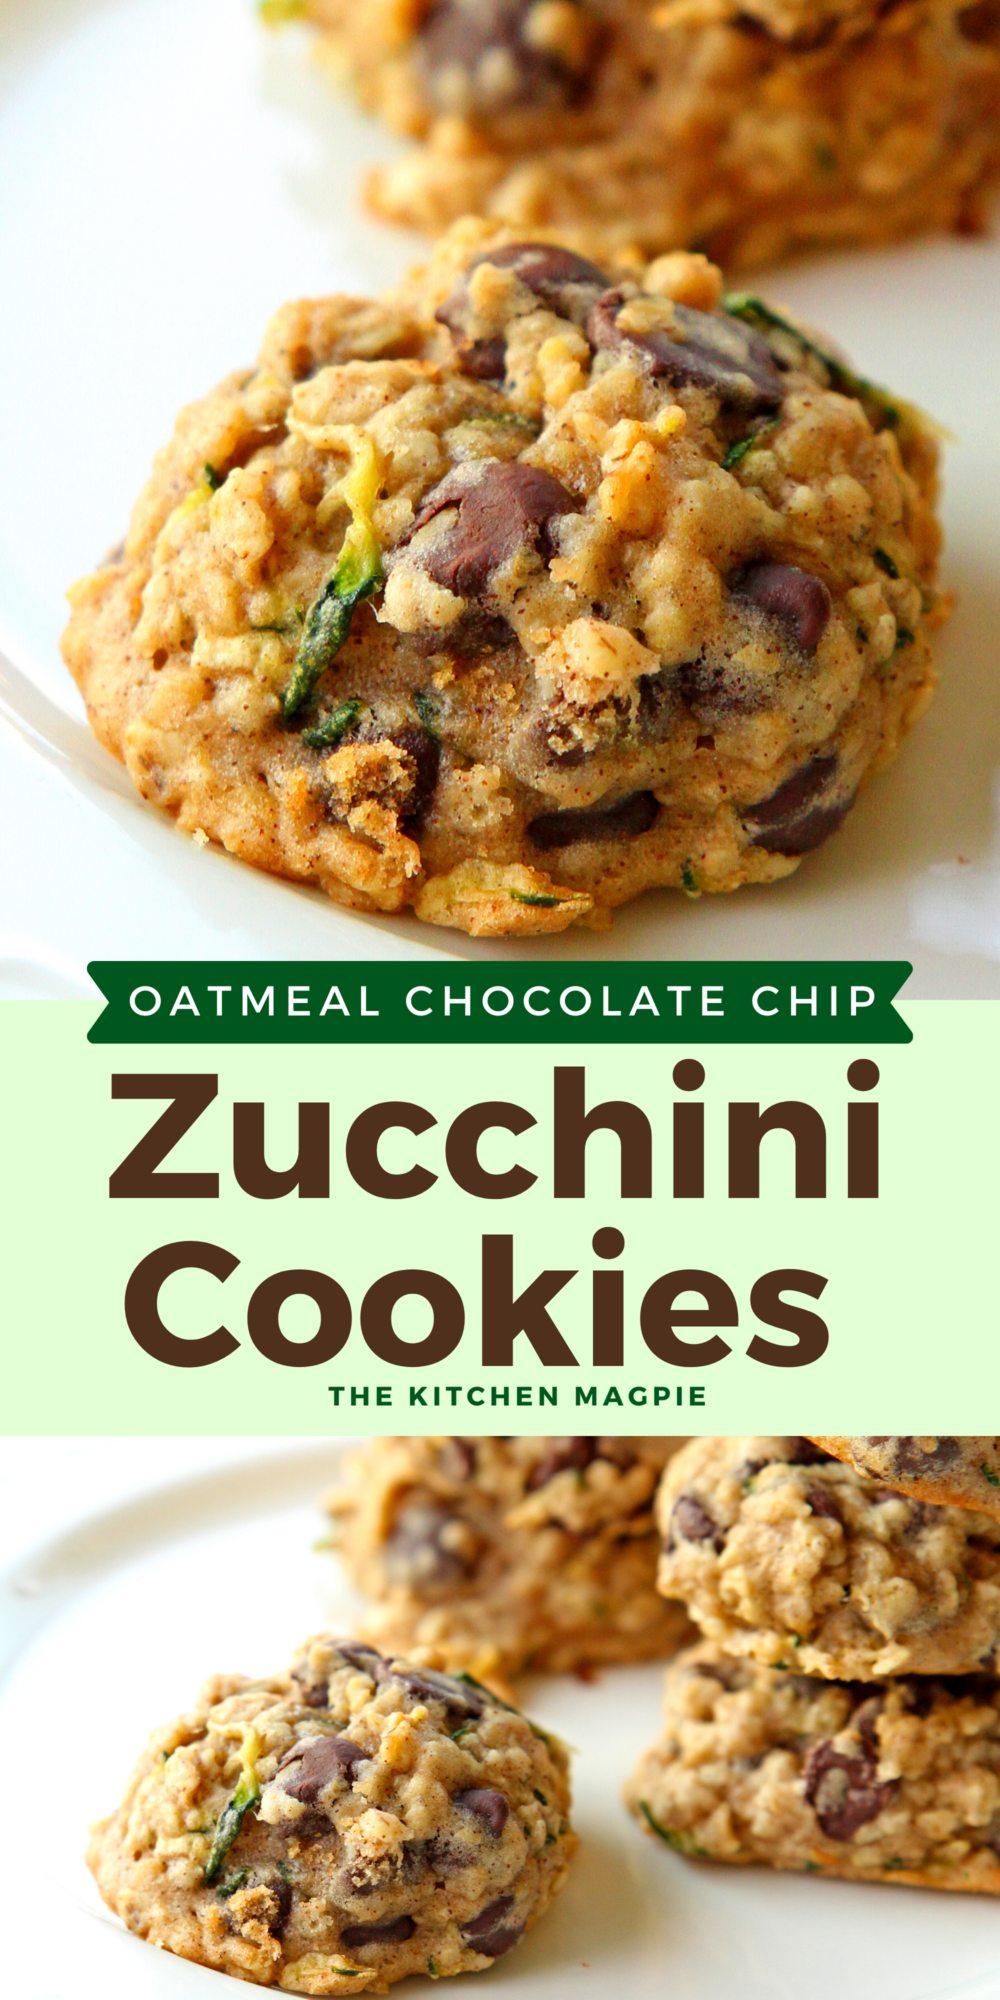 What a fabulous way to use up zucchini! Bake it up with some oatmeal and chocolate chips and you have one seriously decadent zucchini cookie! It's healthy because it has squash in it, right? #zucchini #cookies #chocolatechipcookies